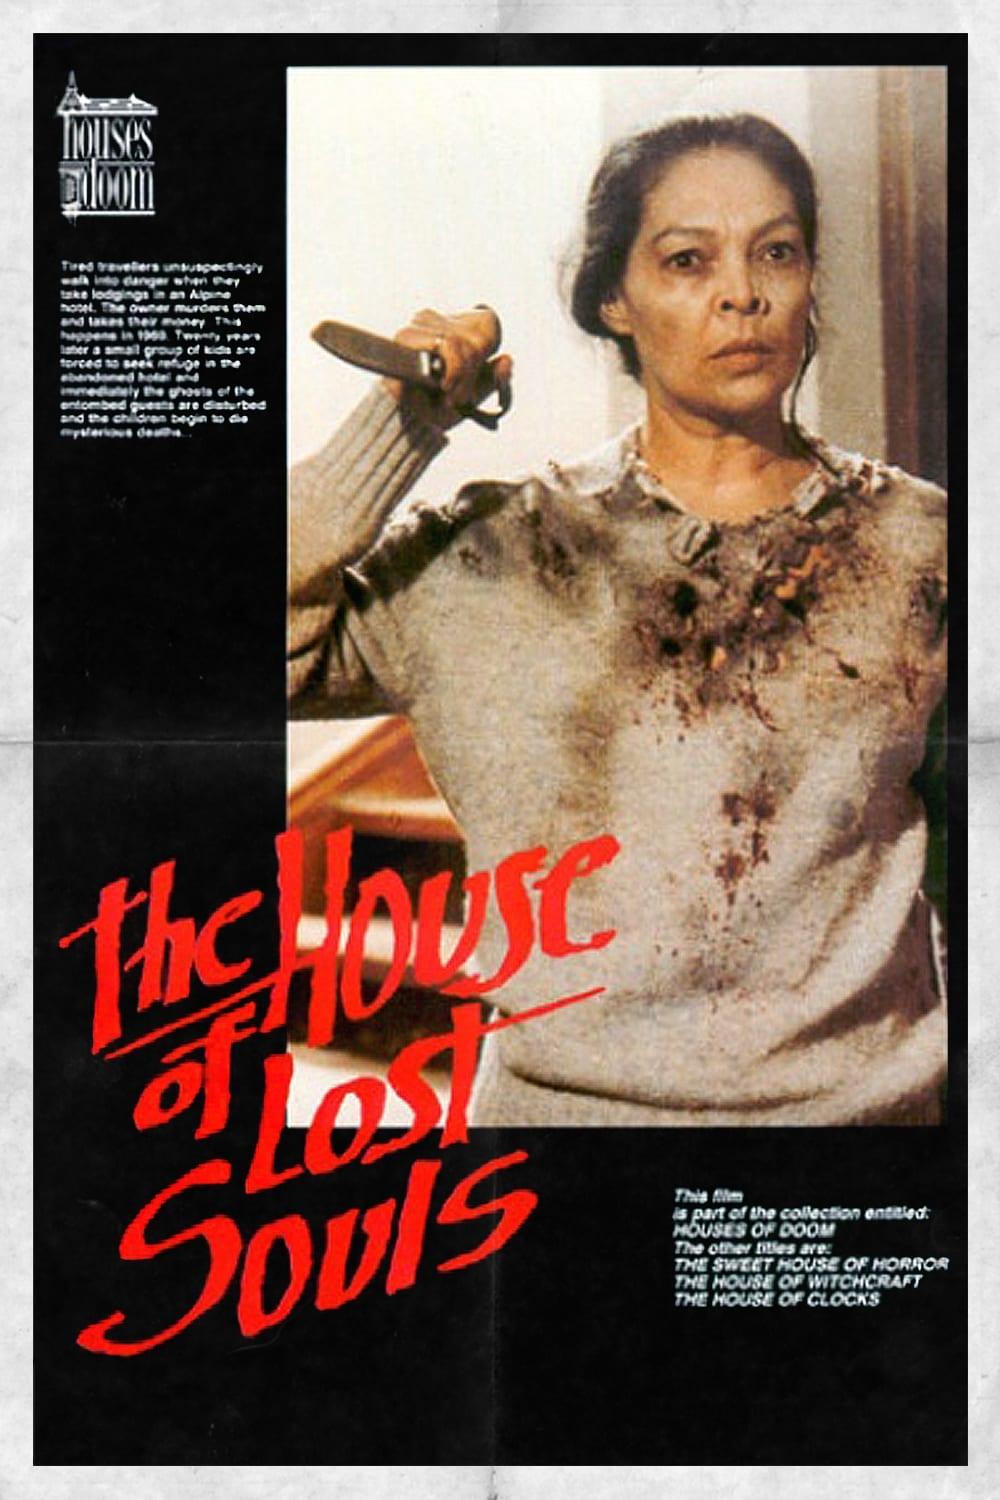 The House of Lost Souls poster